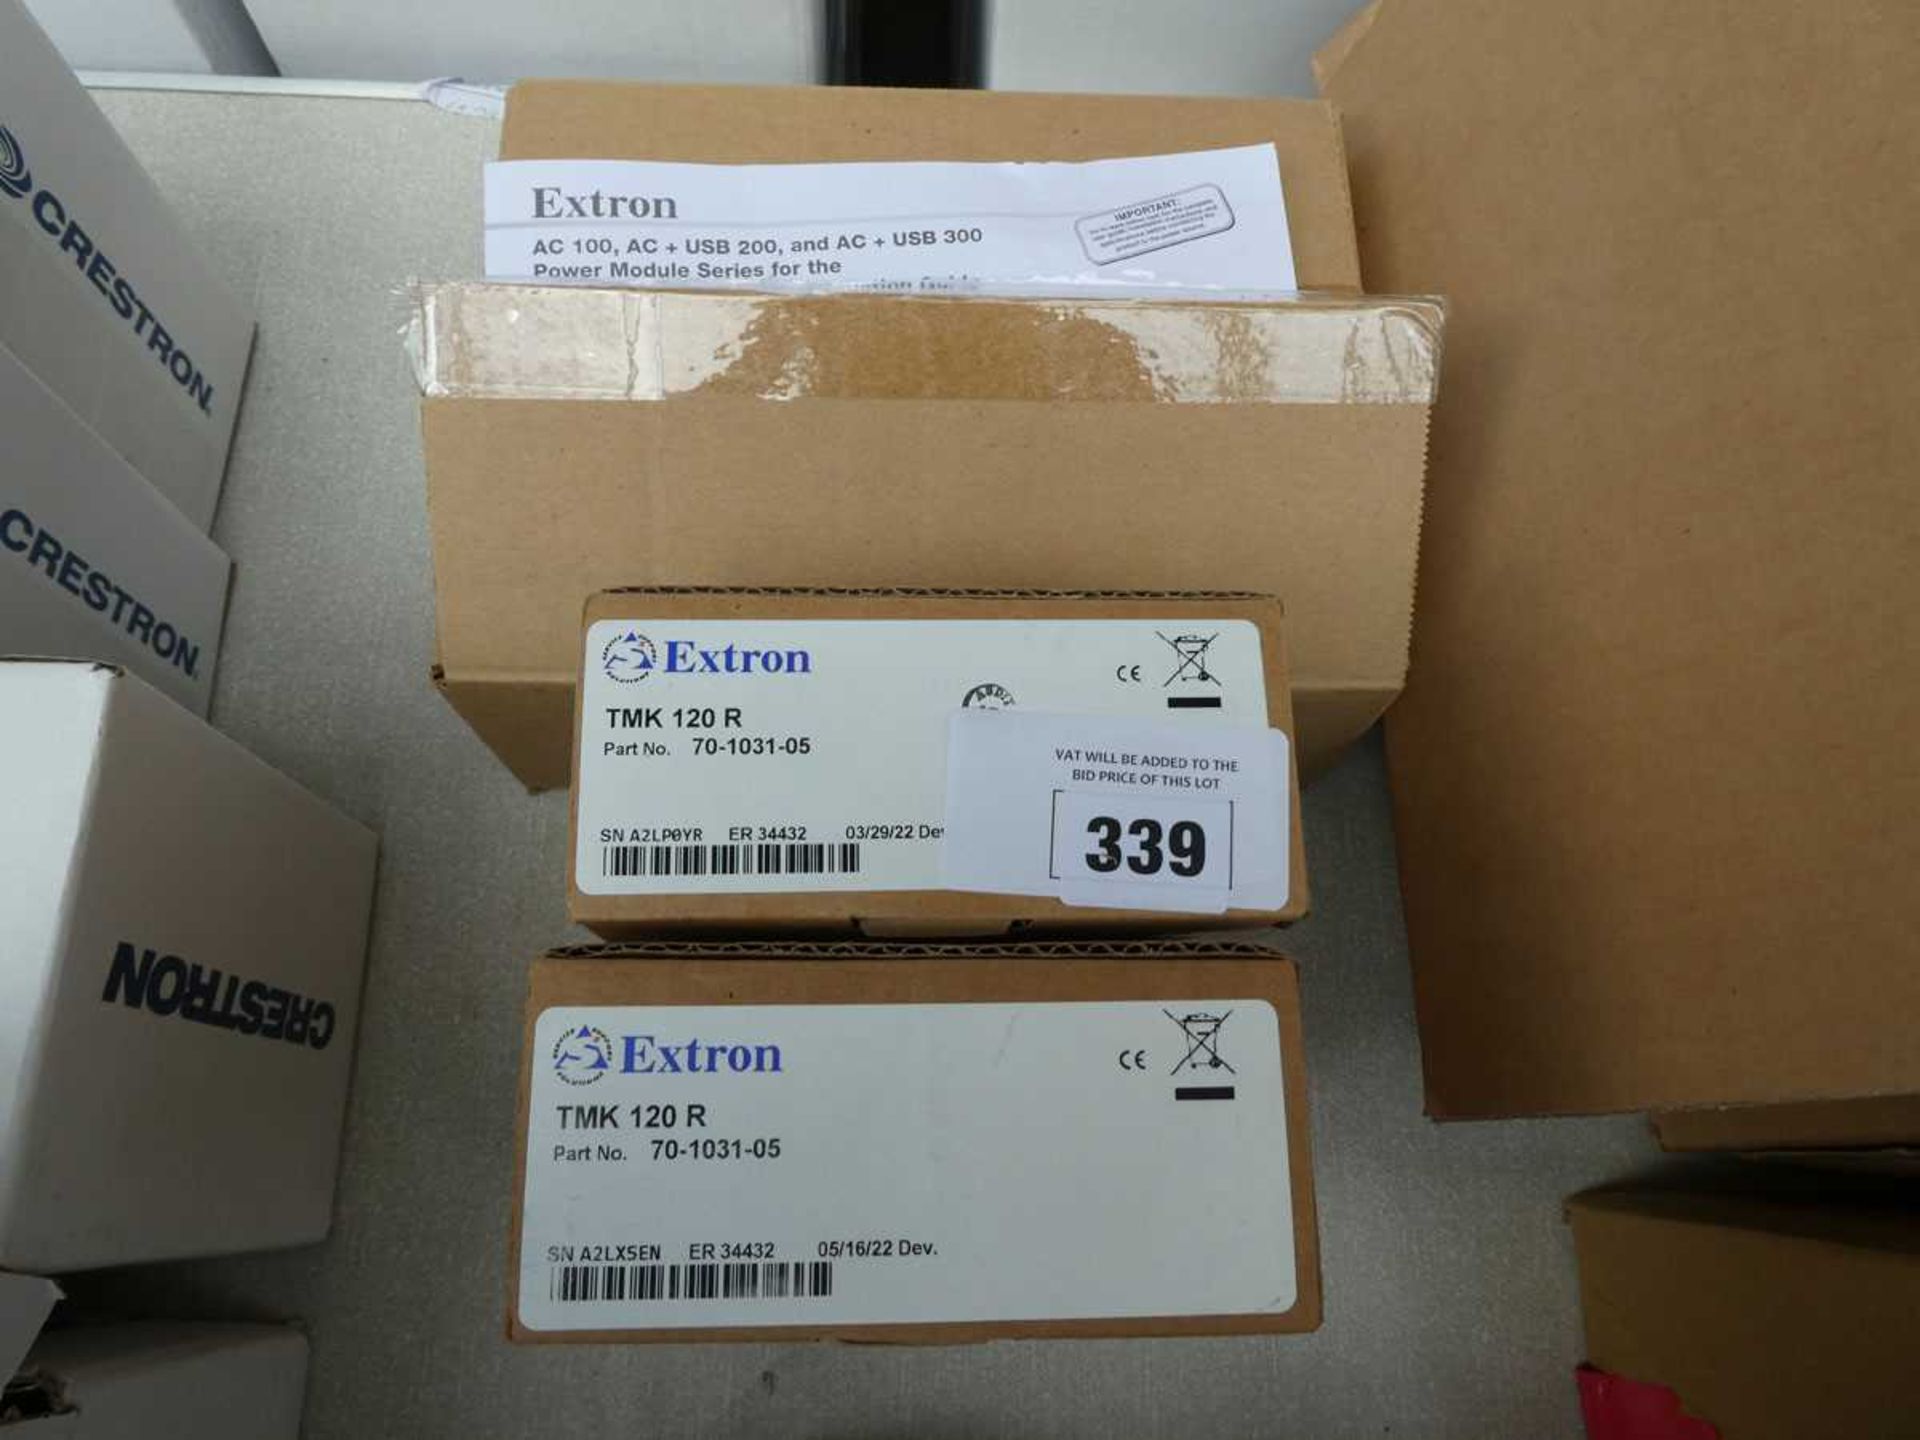 +VAT 3 boxes including 1 Extron AC+USB 311UK power module for cable cubby and 2 Extron TMK 120R